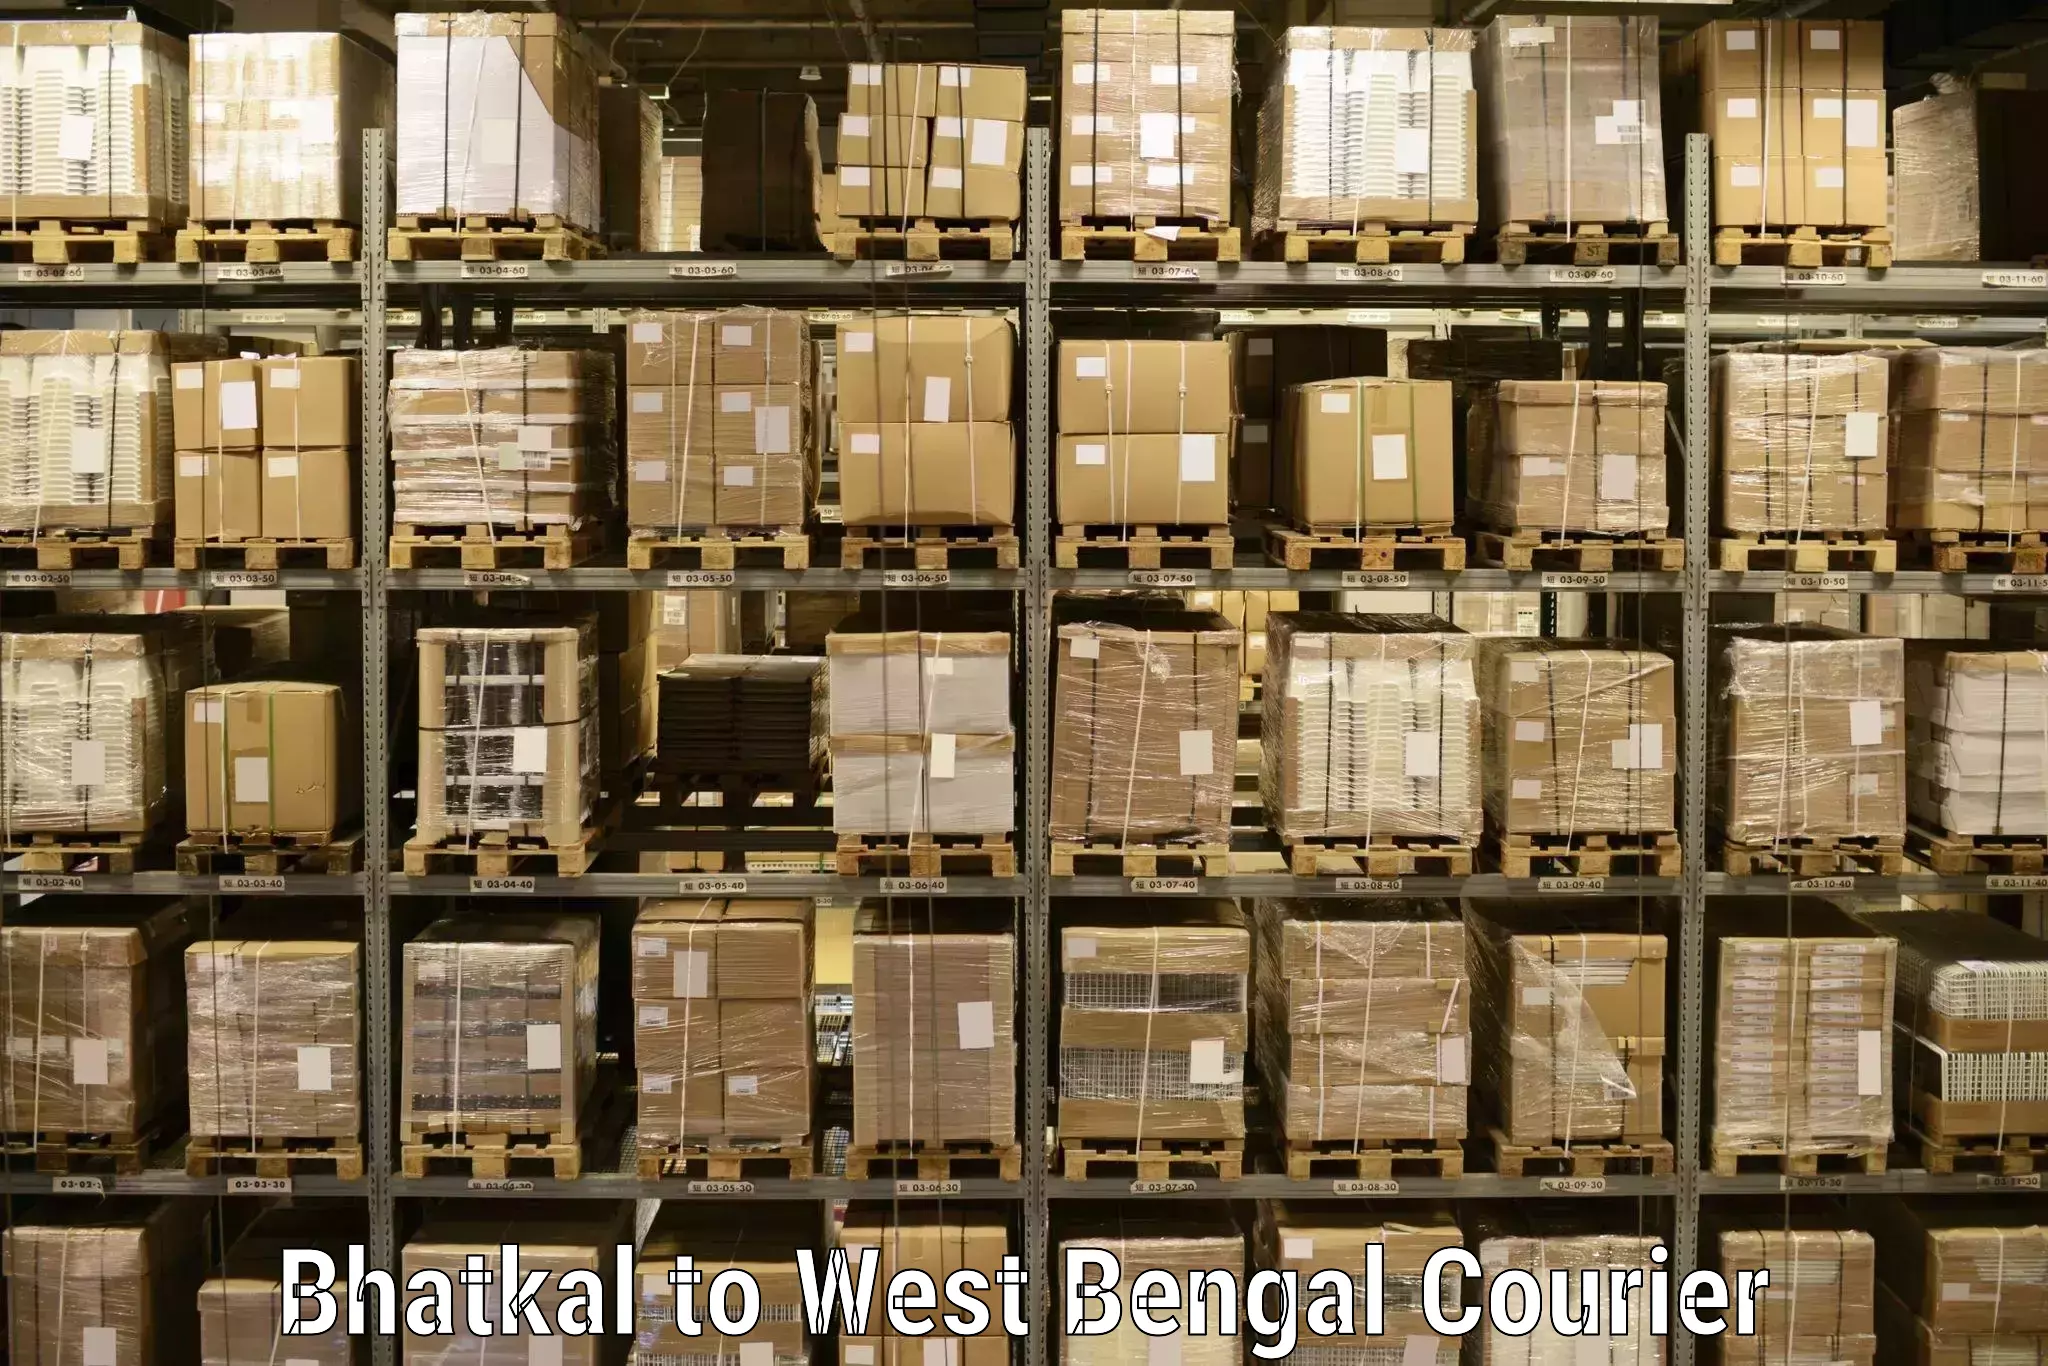 Global shipping networks Bhatkal to Bhatpara